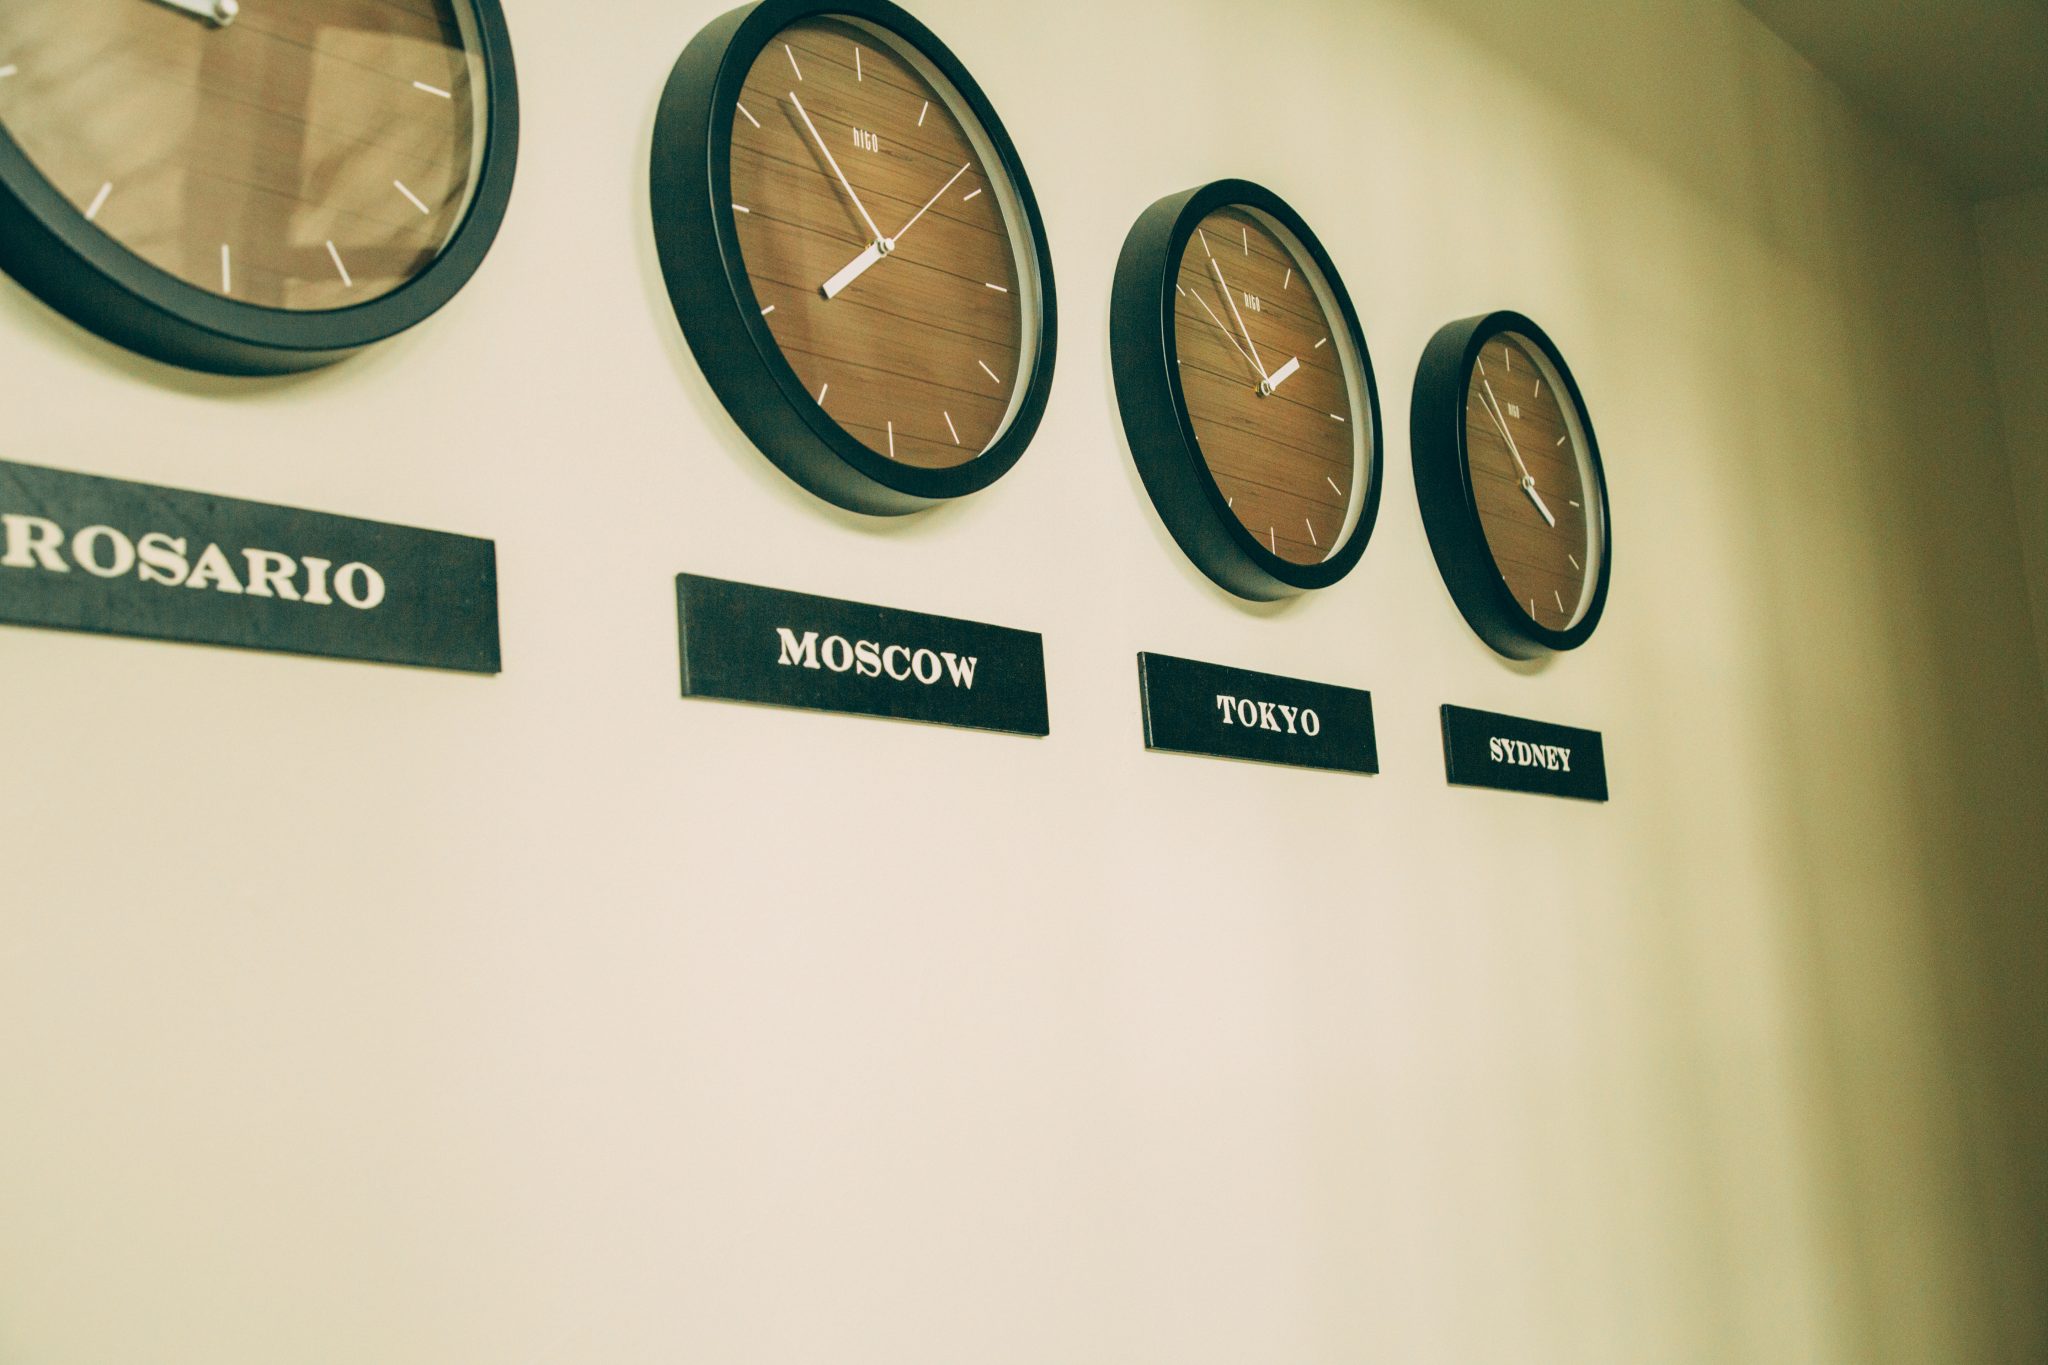 A closer look at the time zone wall created with wall-mounted analog clocks set to different locations. Each clock as a placard underneath indicating the time zone.